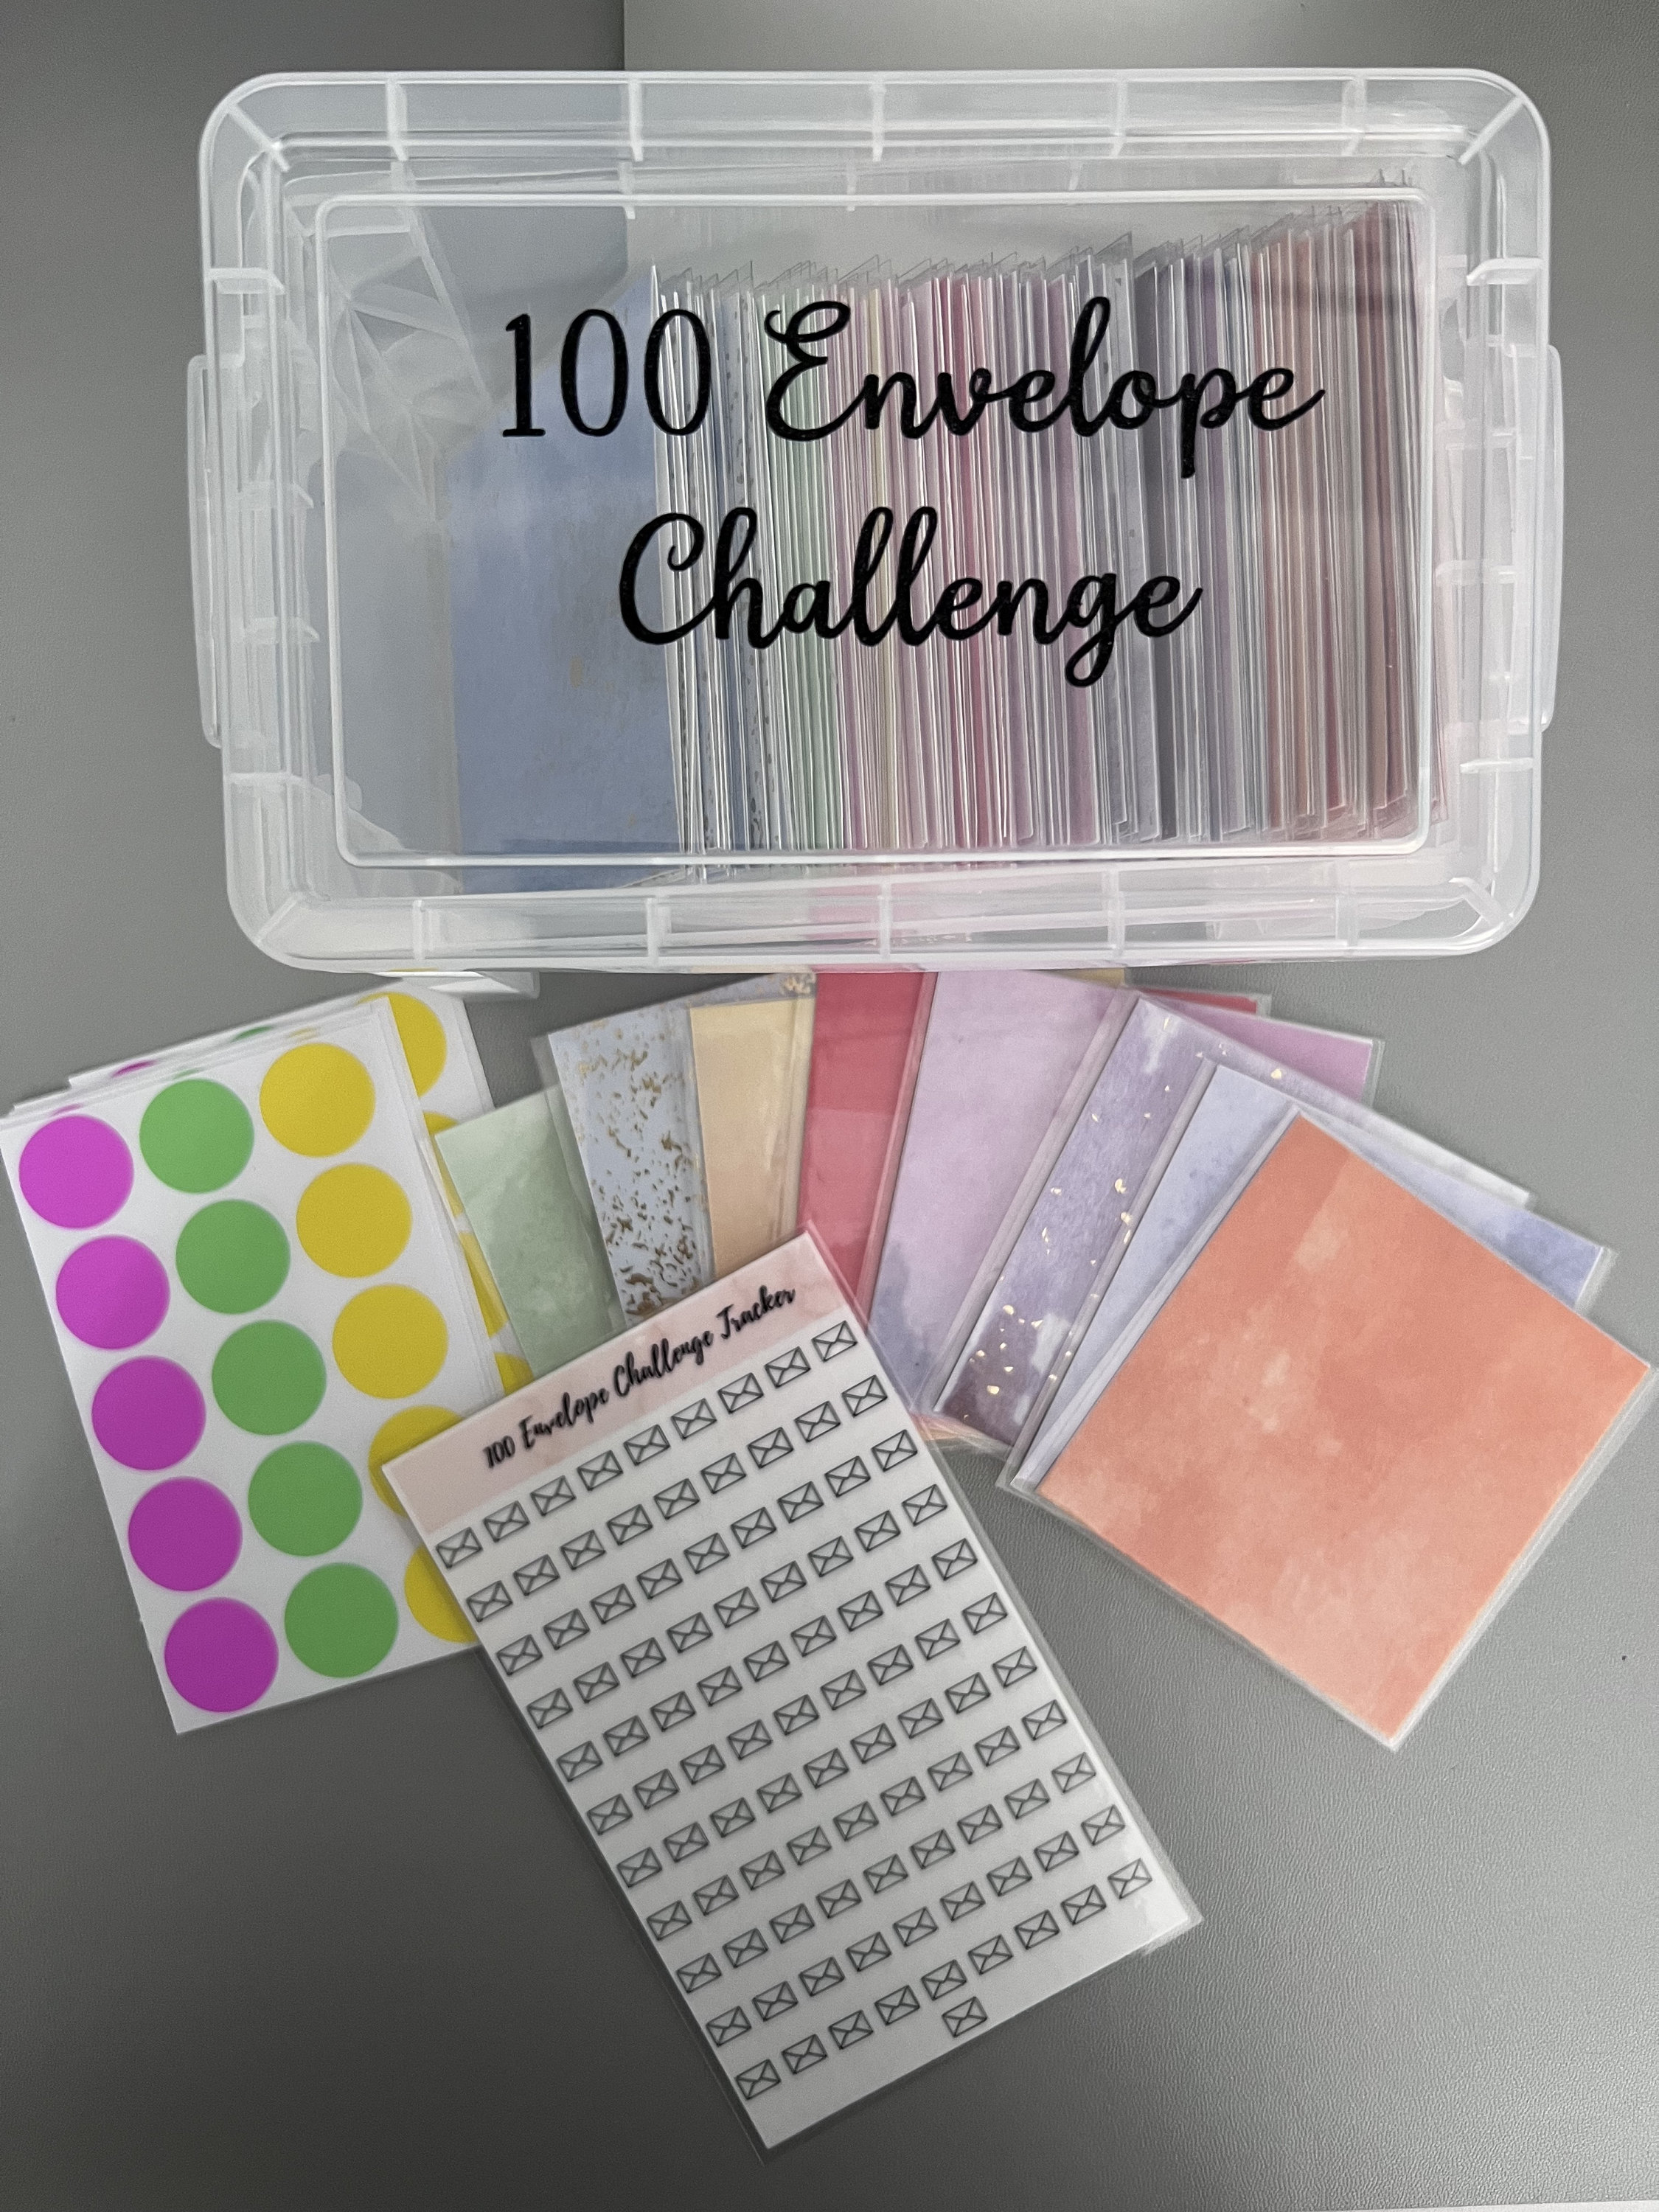 X-Large Number Stickers 1 - 100. Planner Stickers. 100 Envelope Challenge  || F752